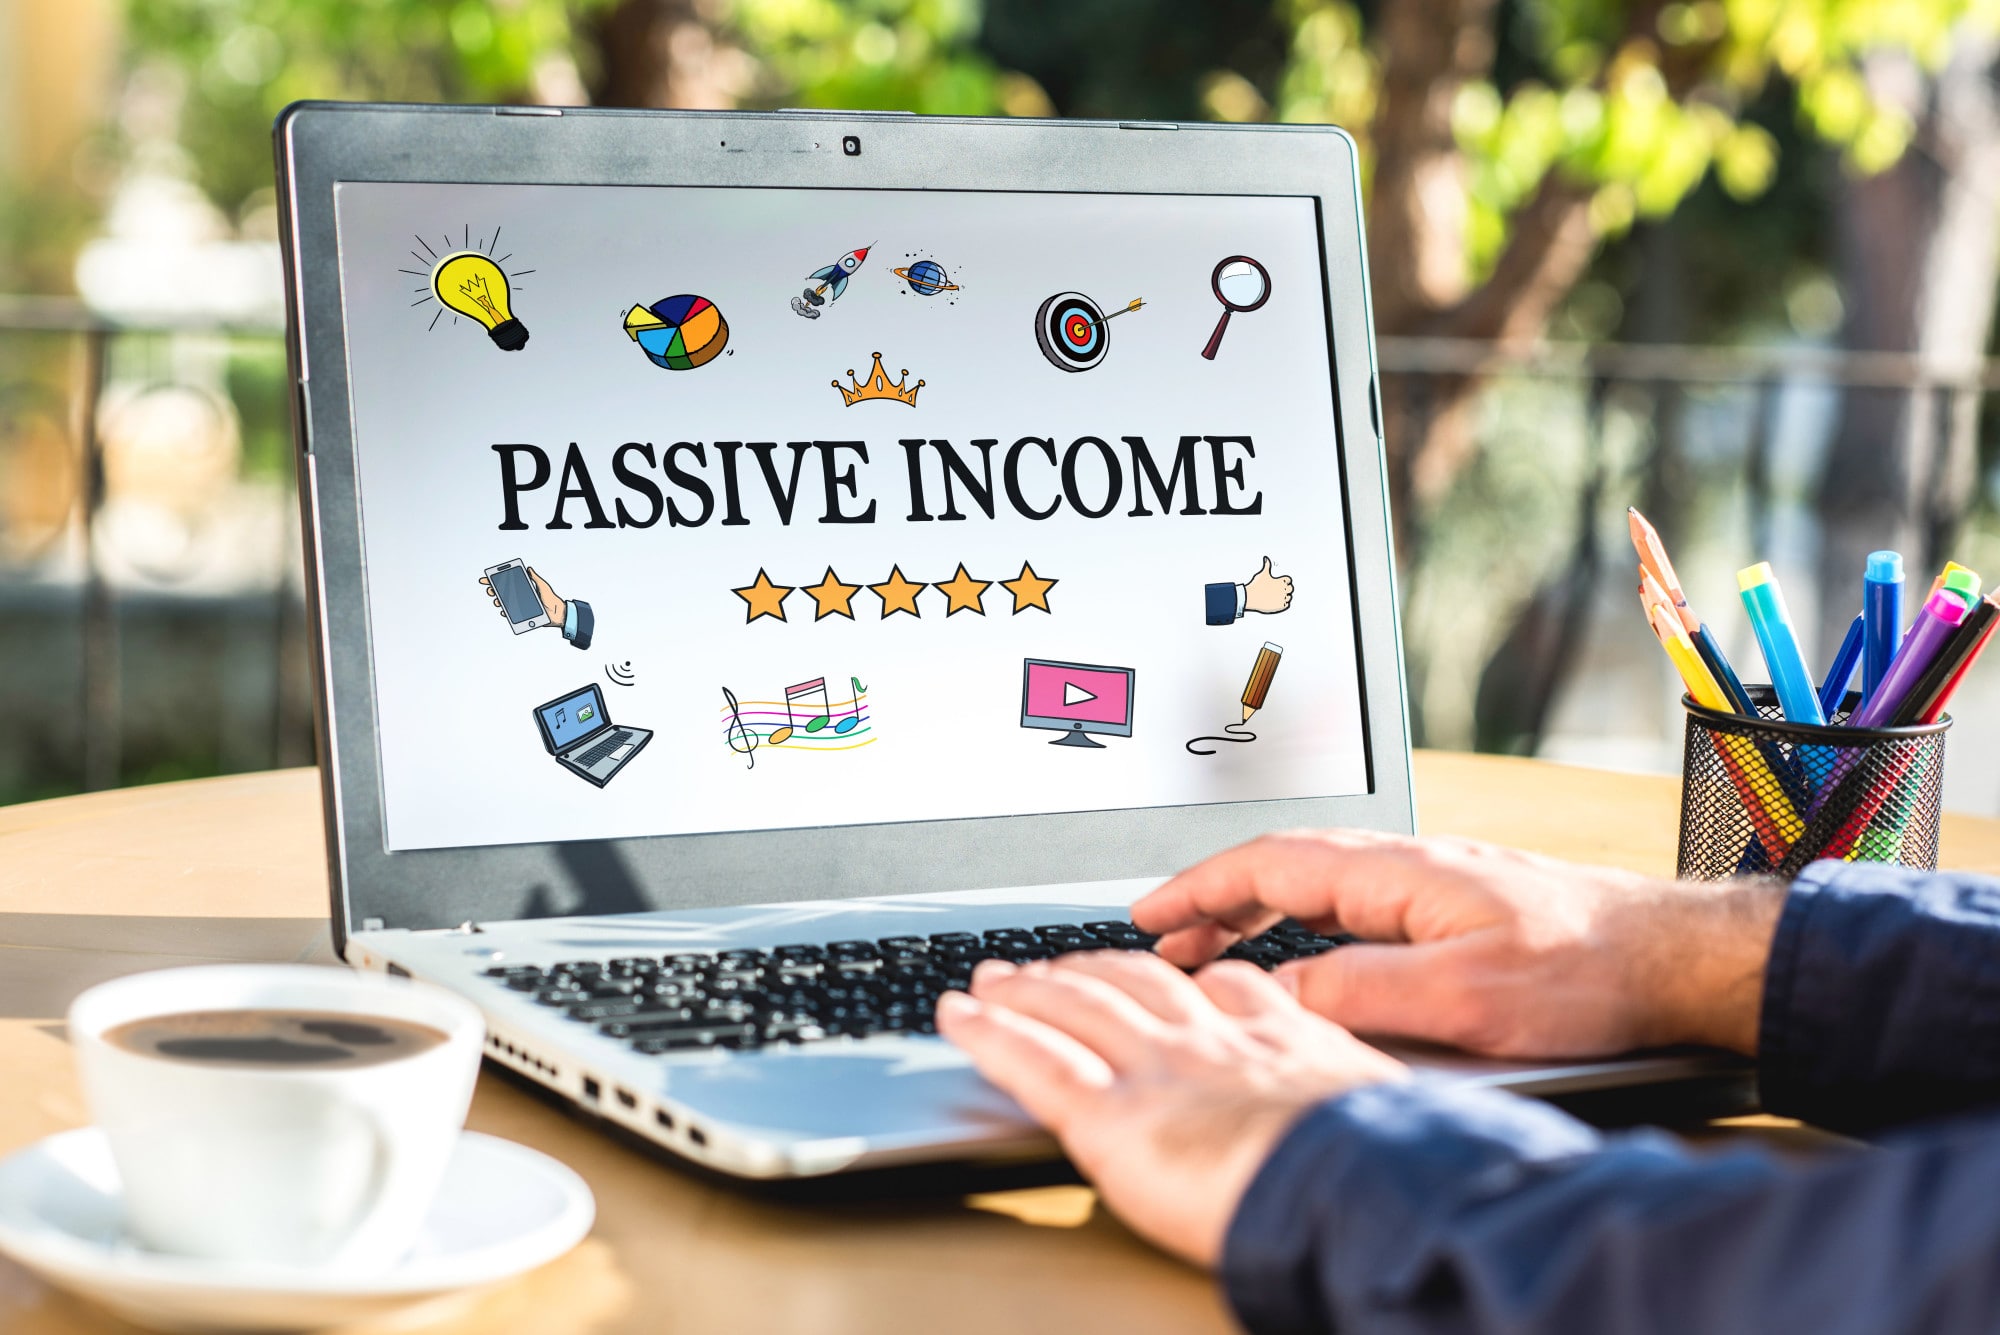 How To Make Passive Income a Reality Through Rental Properties